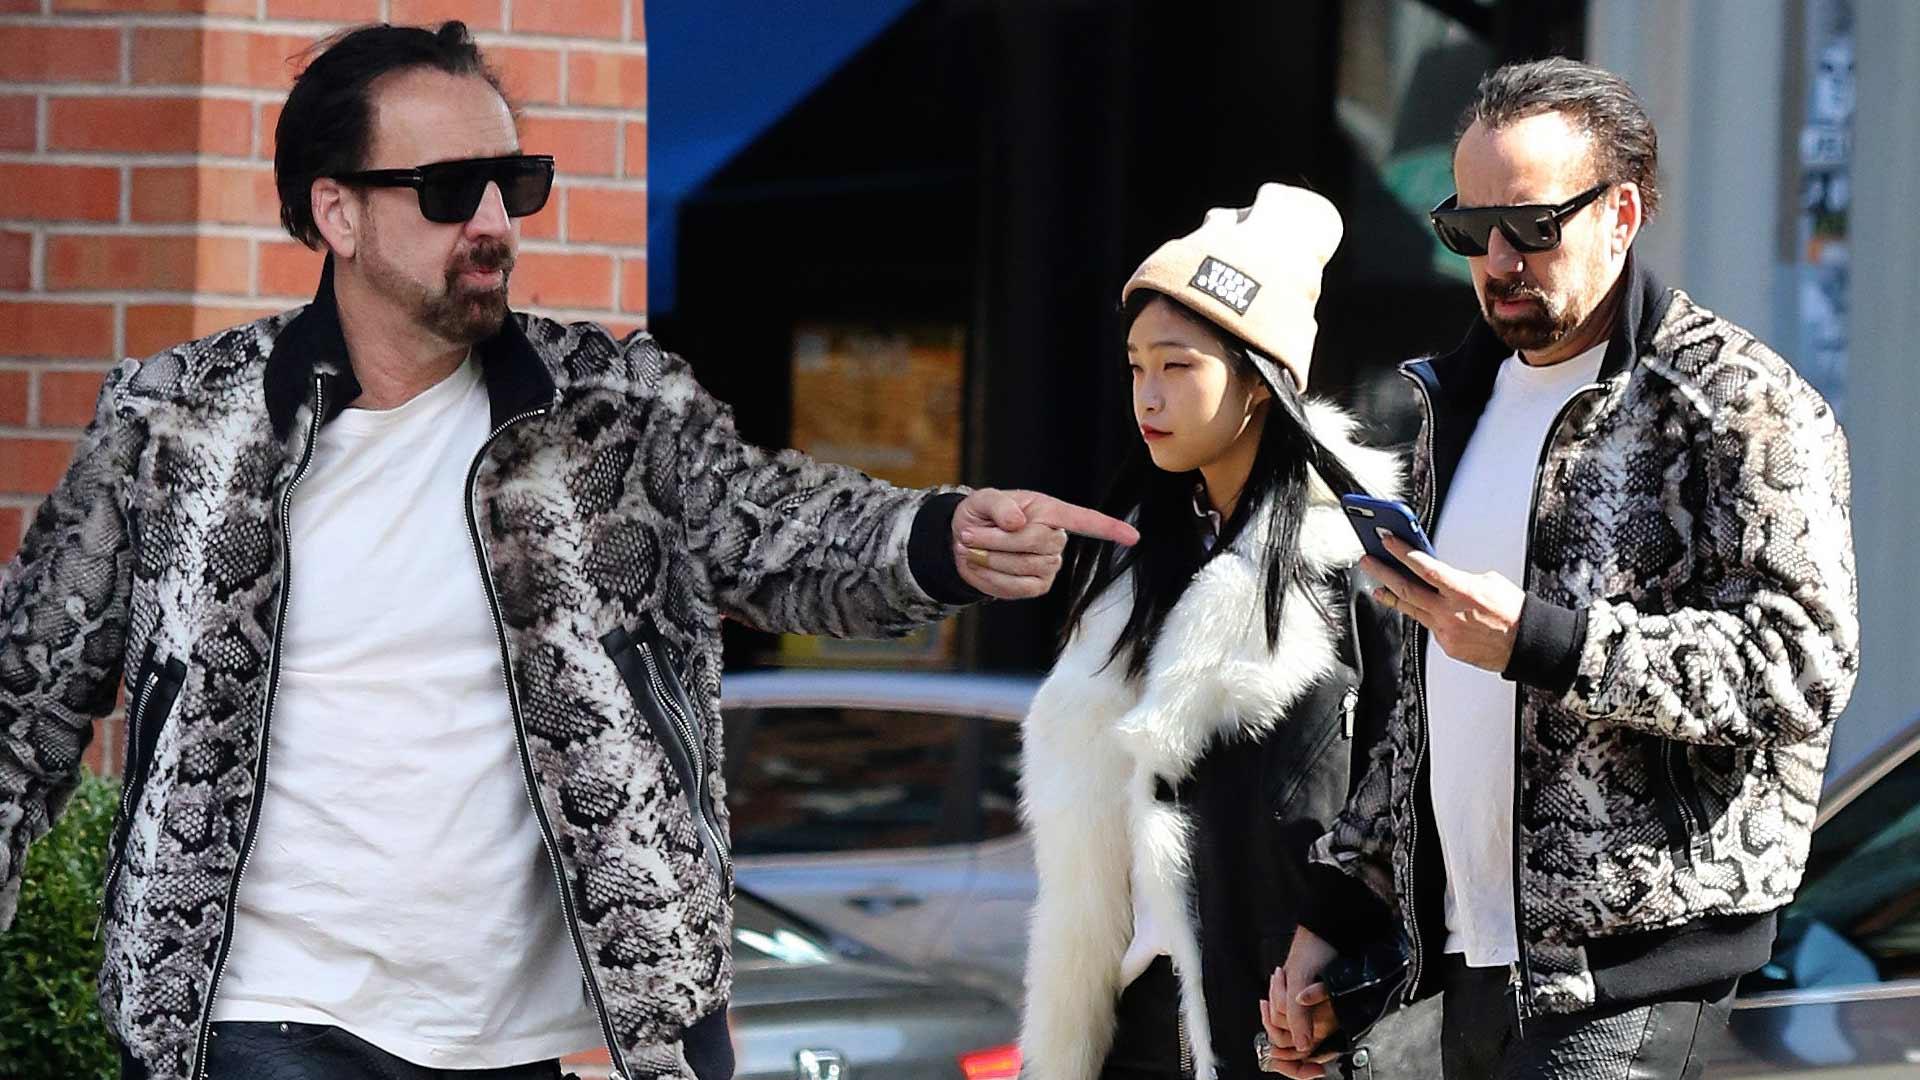 Nicolas Cage Looks Like A Total Bada– While Holding Hands With New GF One Week After Visiting His Own Tomb